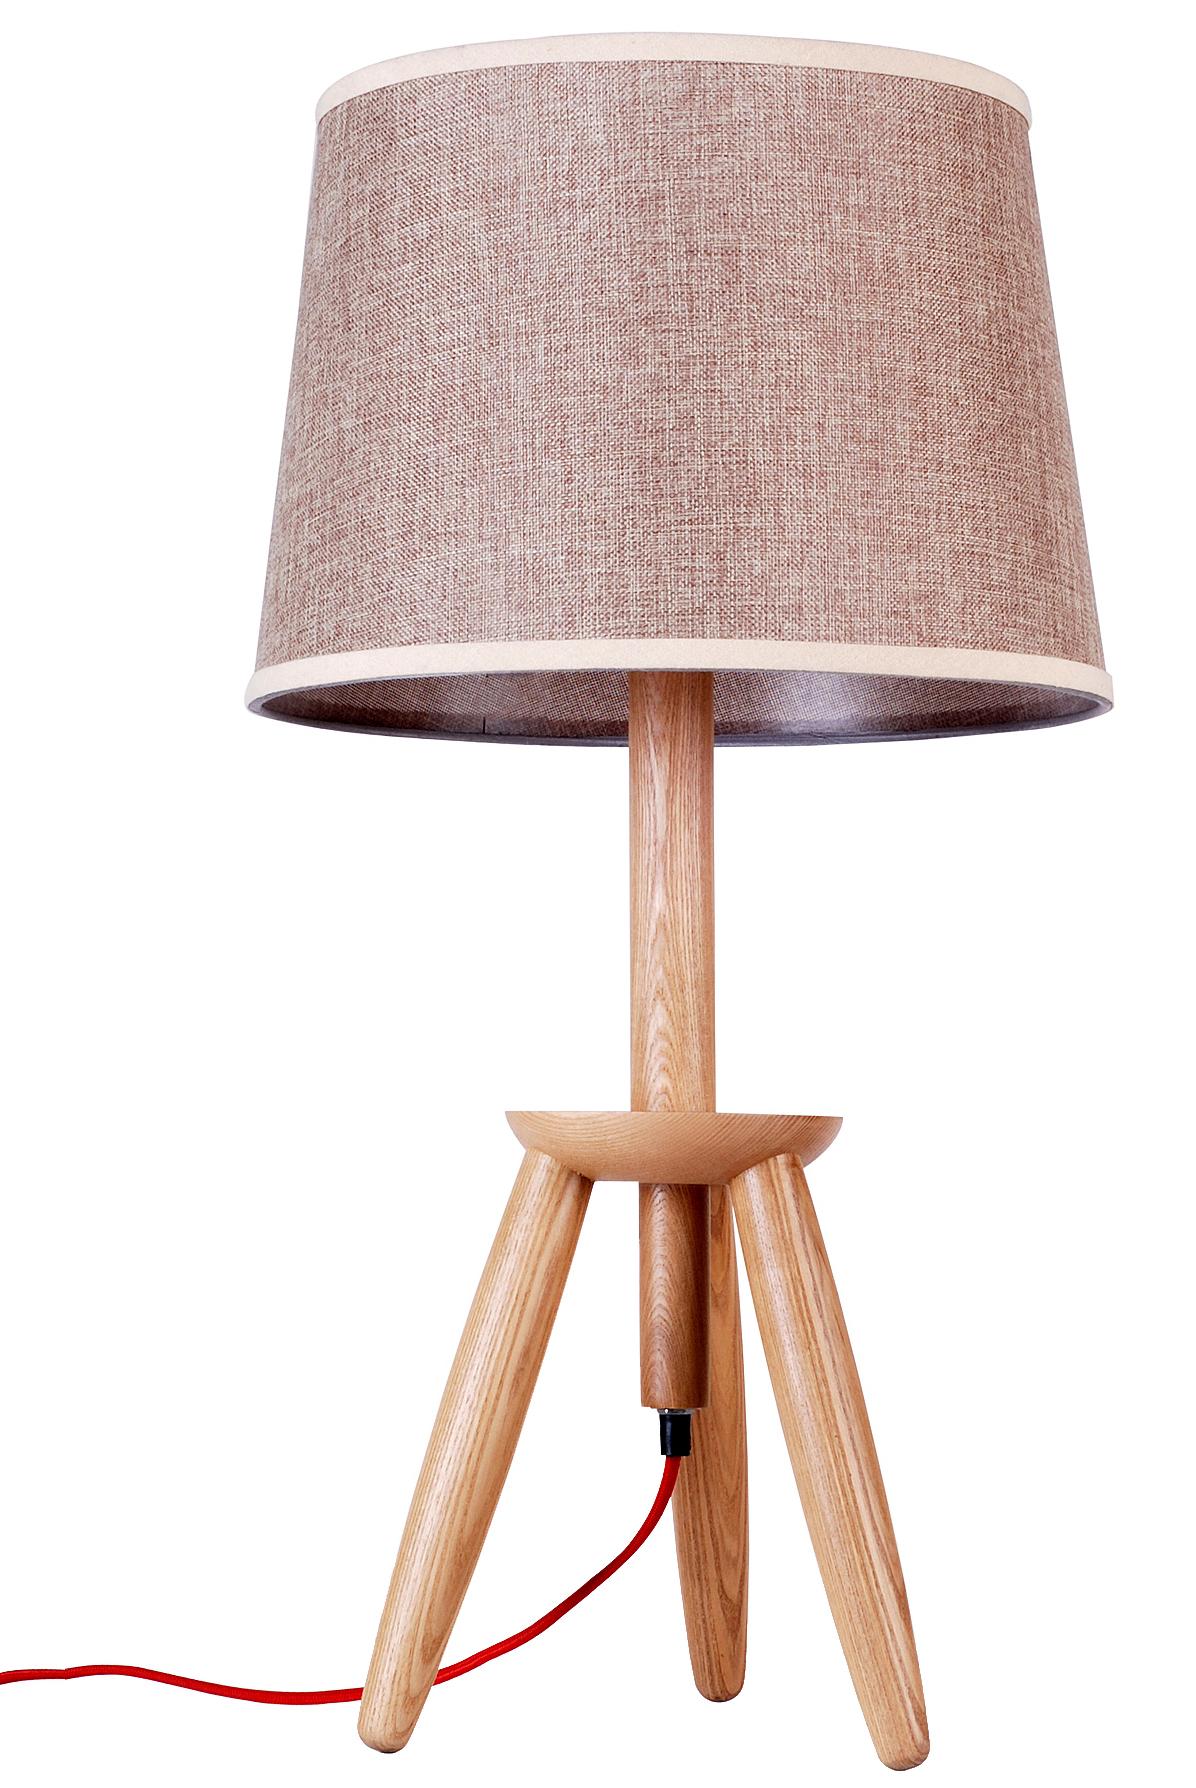 Contemporary wooden reading table lamp